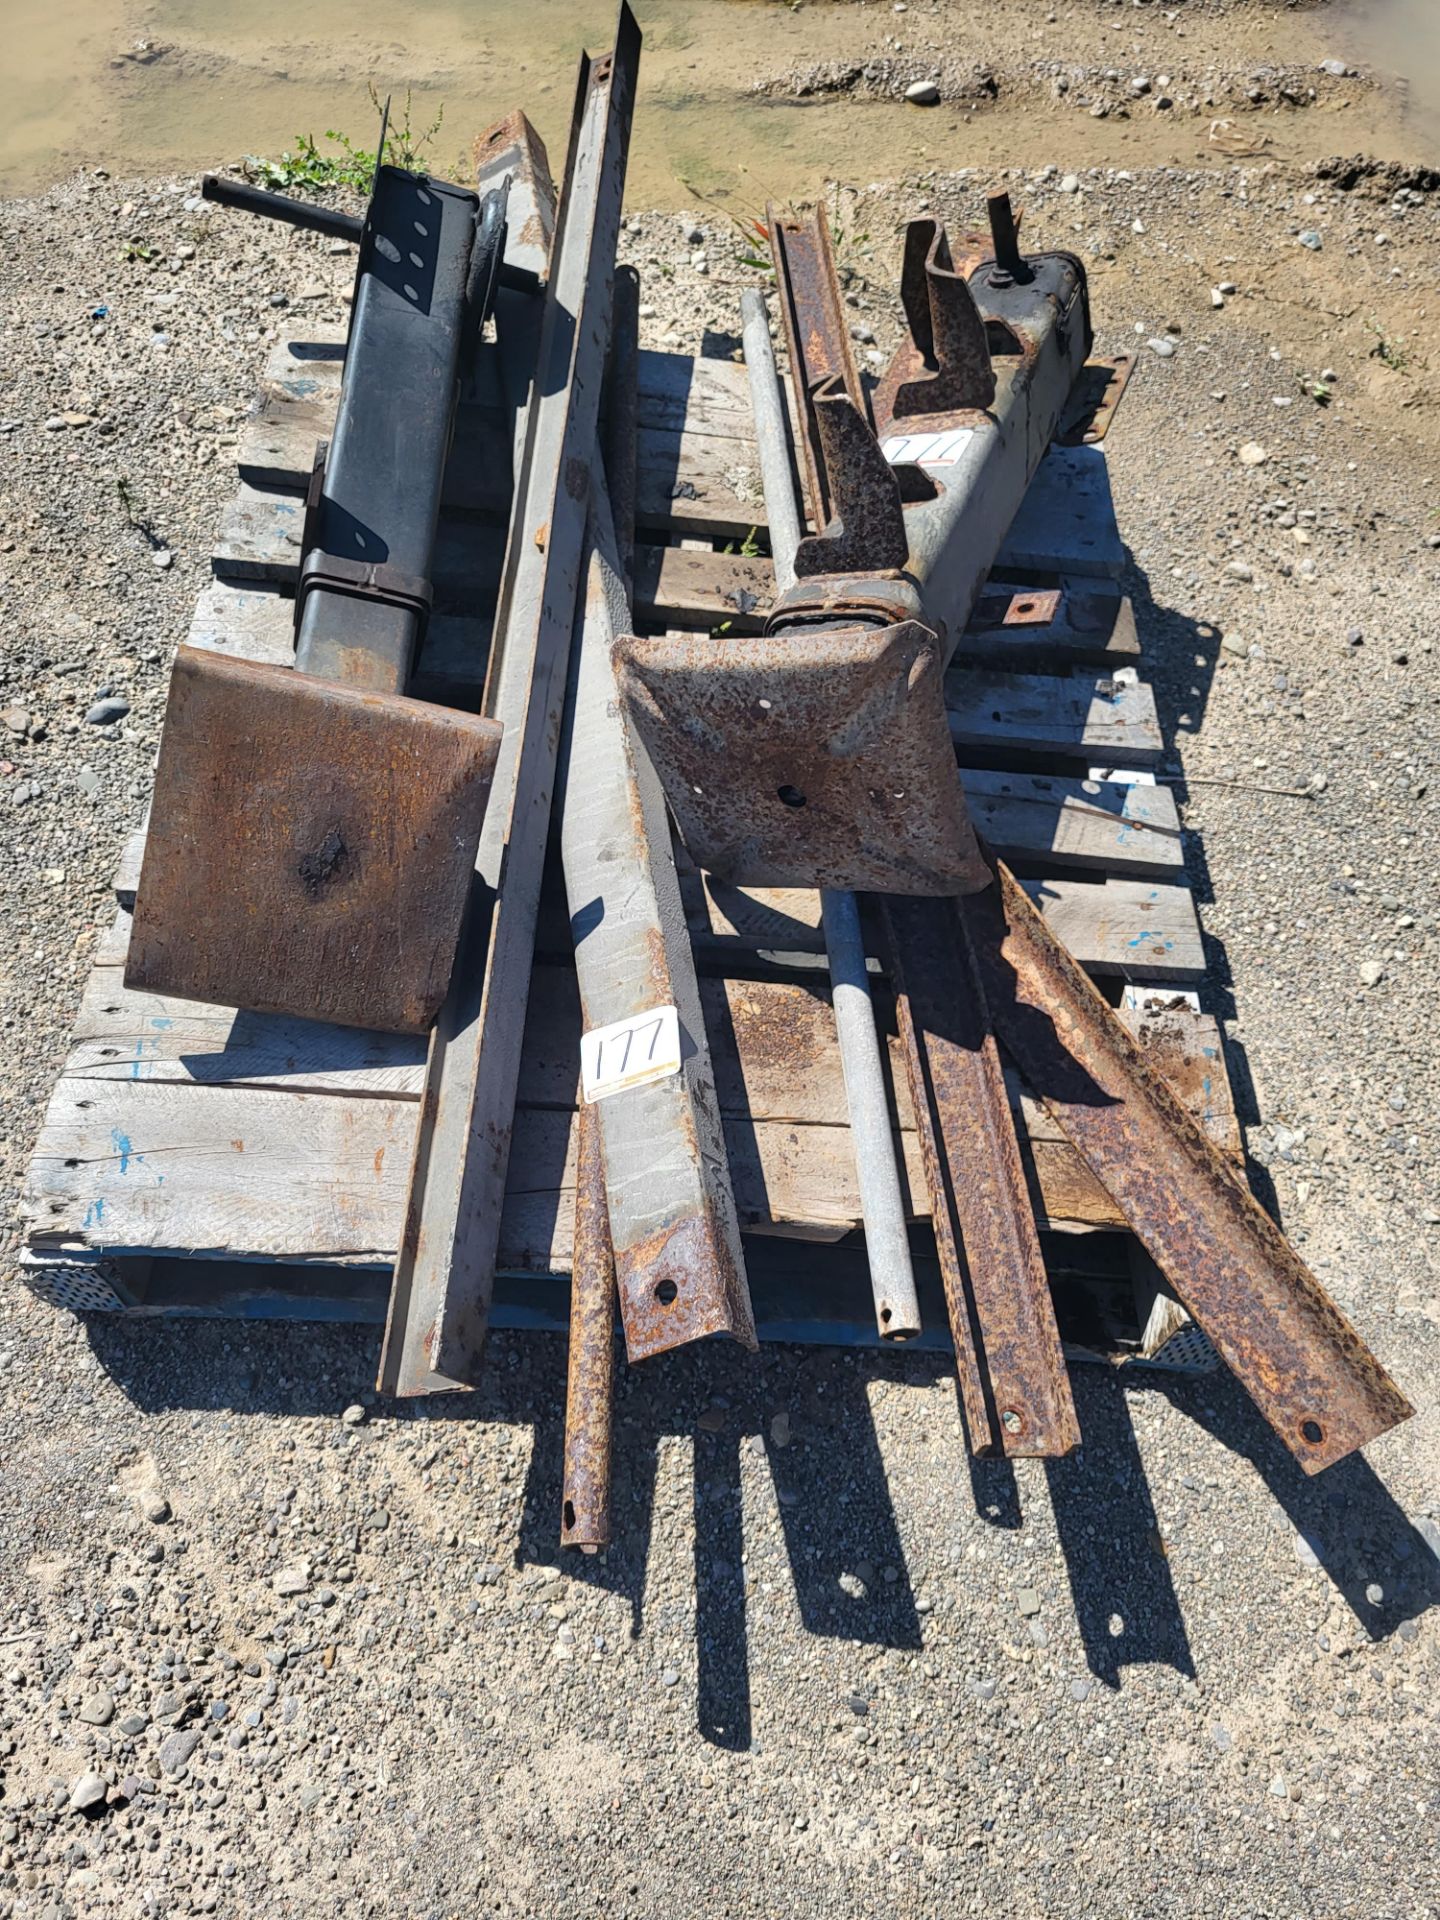 LOT - TRAILER STANDS & ACCESSORIES